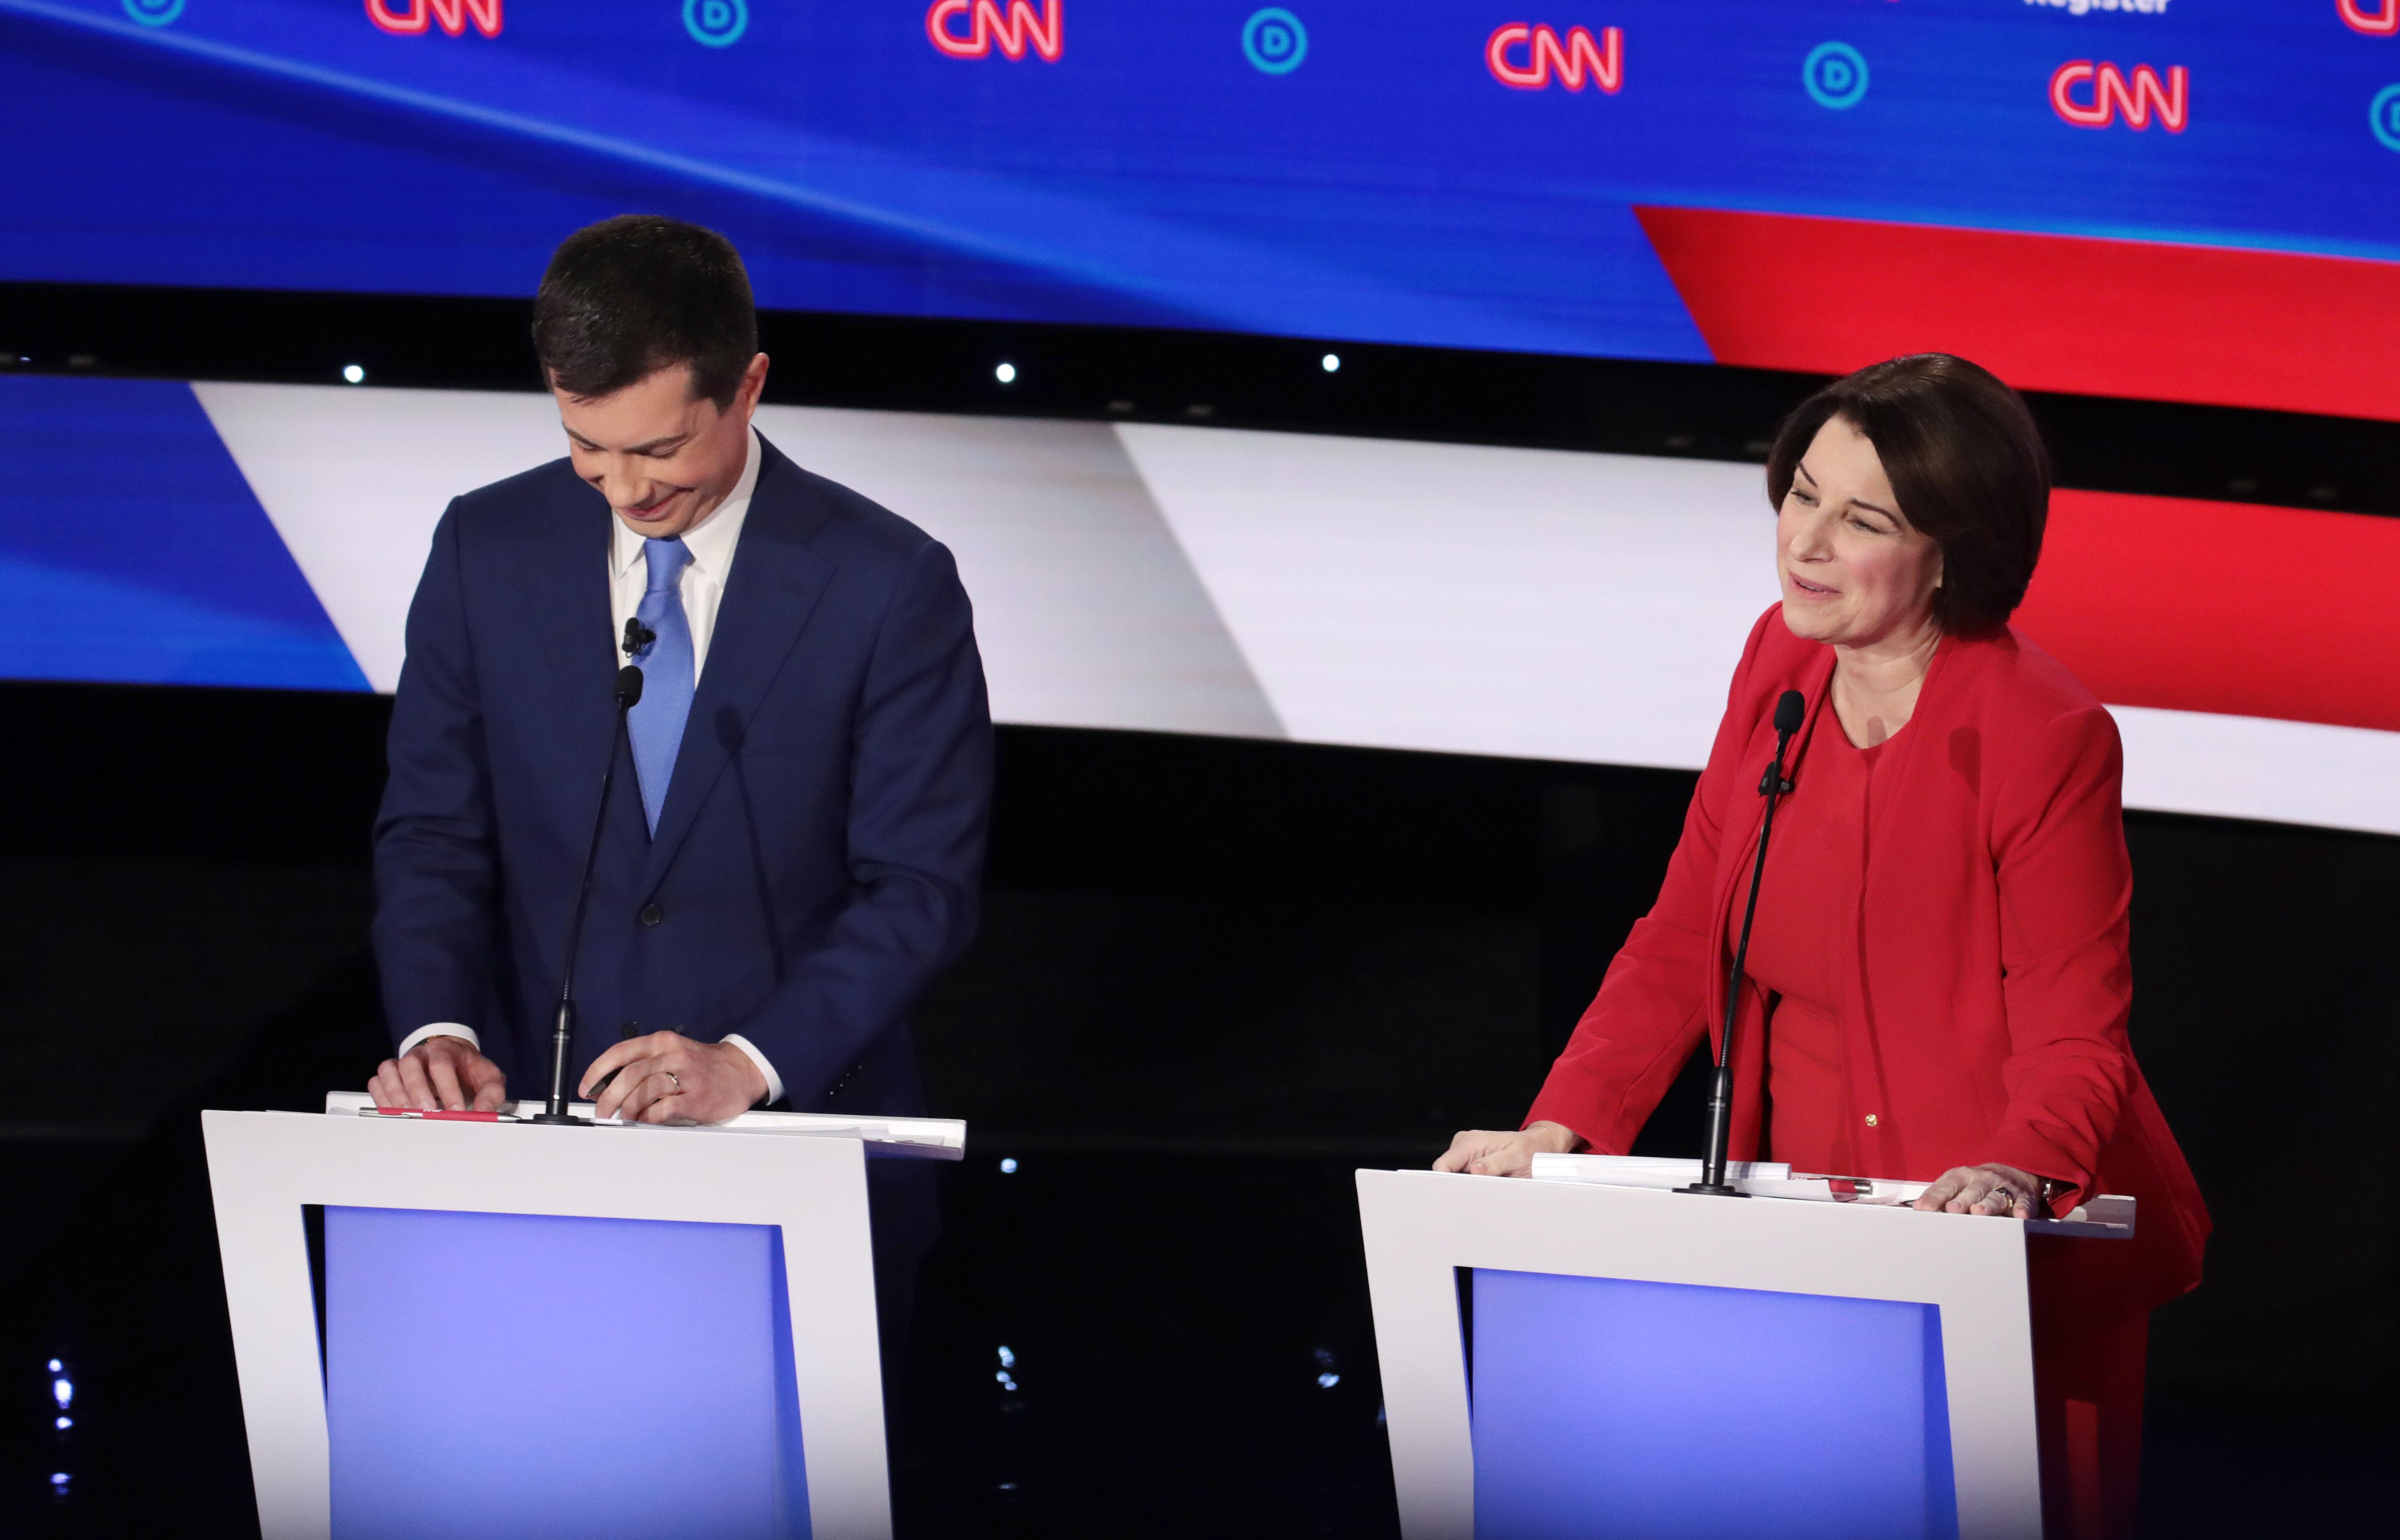  Sen. Amy Klobuchar (D-MN) and South Bend, Indiana Mayor Pete Buttigieg participate in the Democratic presidential primary debate at Drake University on January 14, 2020 in Des Moines, Iowa. 